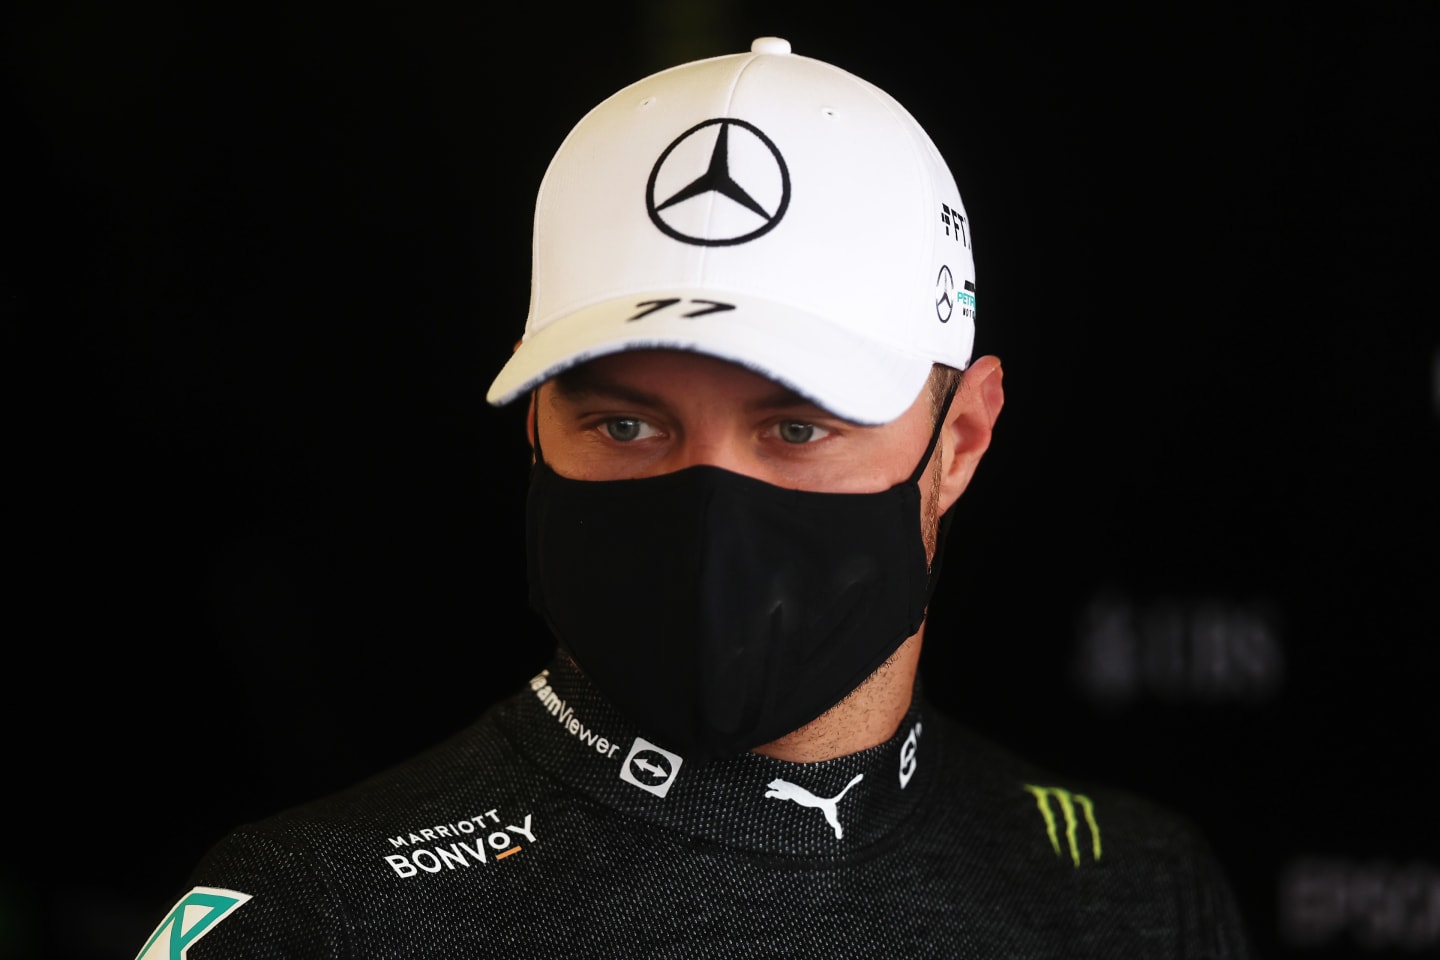 MEXICO CITY, MEXICO - NOVEMBER 05: Valtteri Bottas of Finland and Mercedes GP looks on in the garage during practice ahead of the F1 Grand Prix of Mexico at Autodromo Hermanos Rodriguez on November 05, 2021 in Mexico City, Mexico. (Photo by Lars Baron/Getty Images)